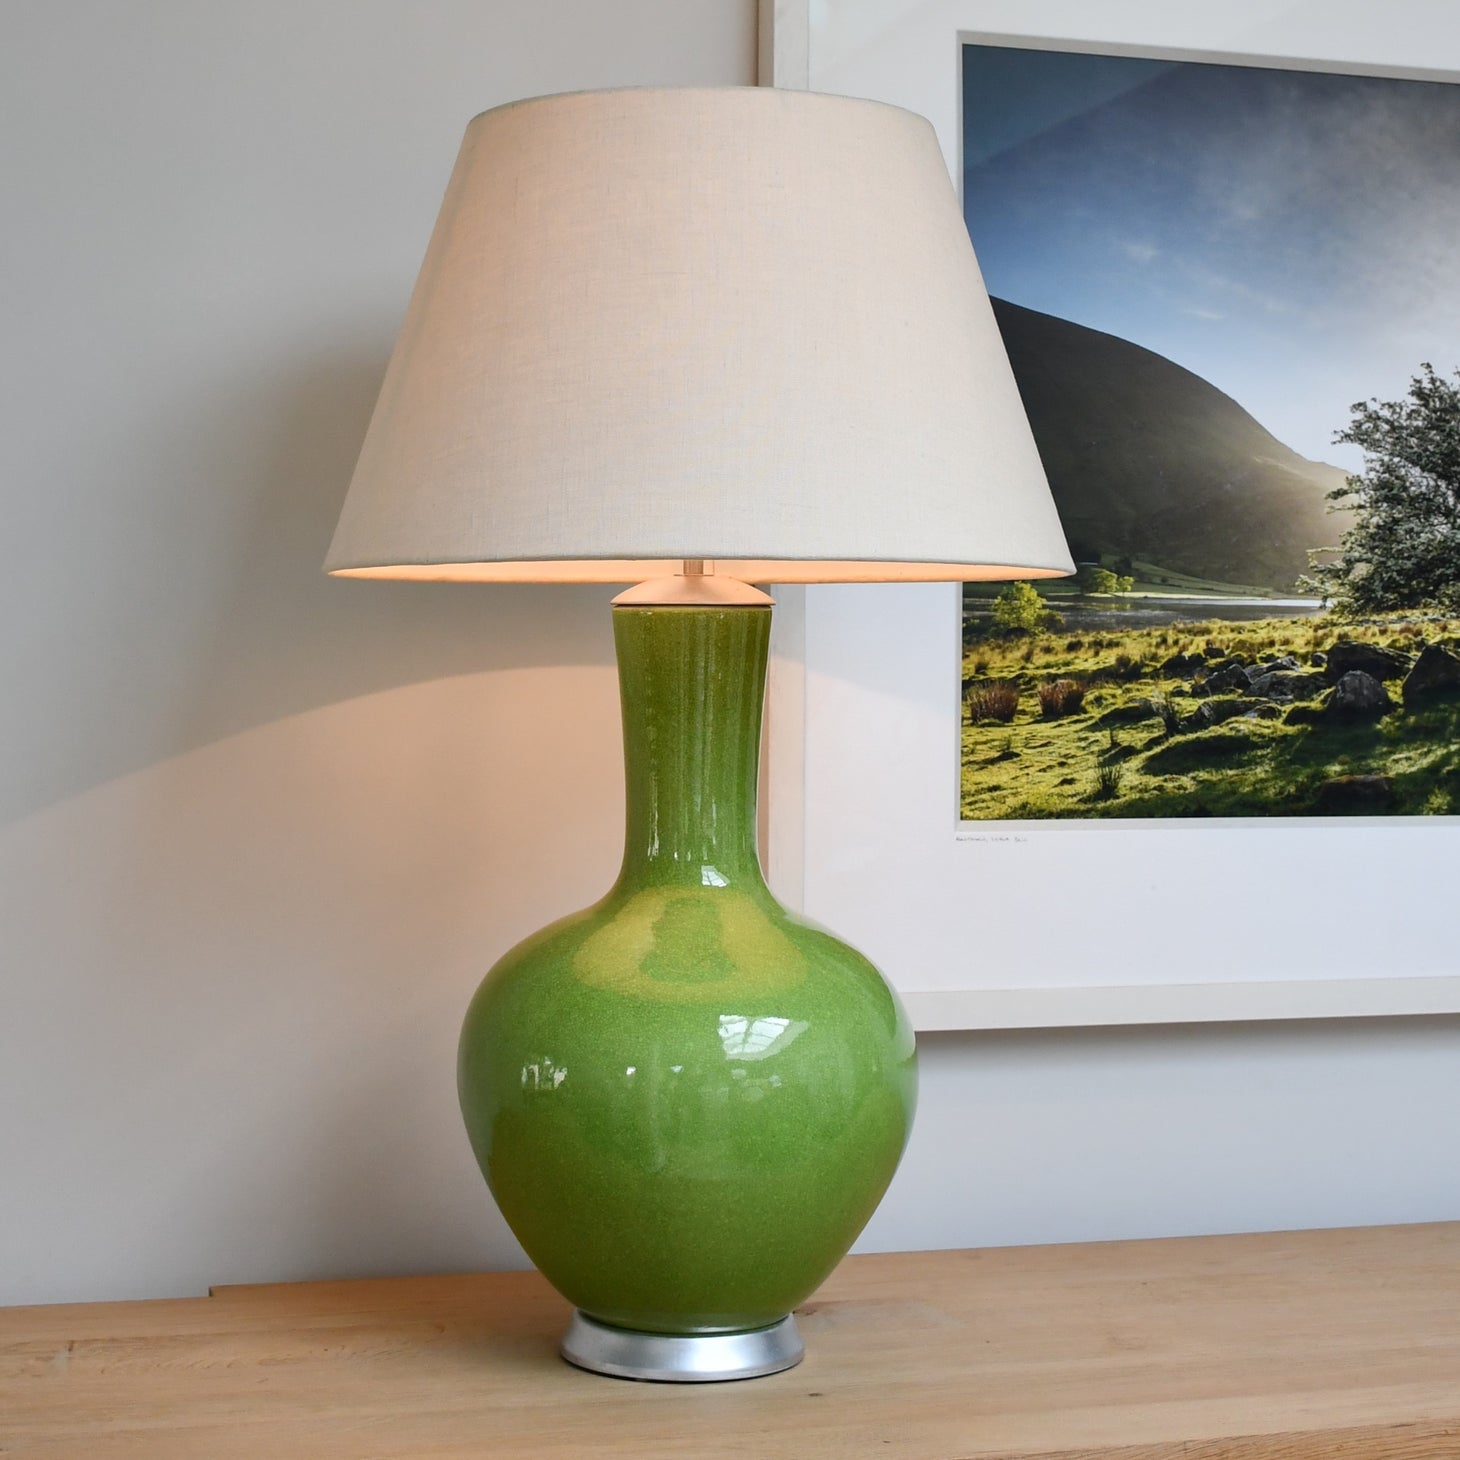 Large Apple Green - Table Lamp